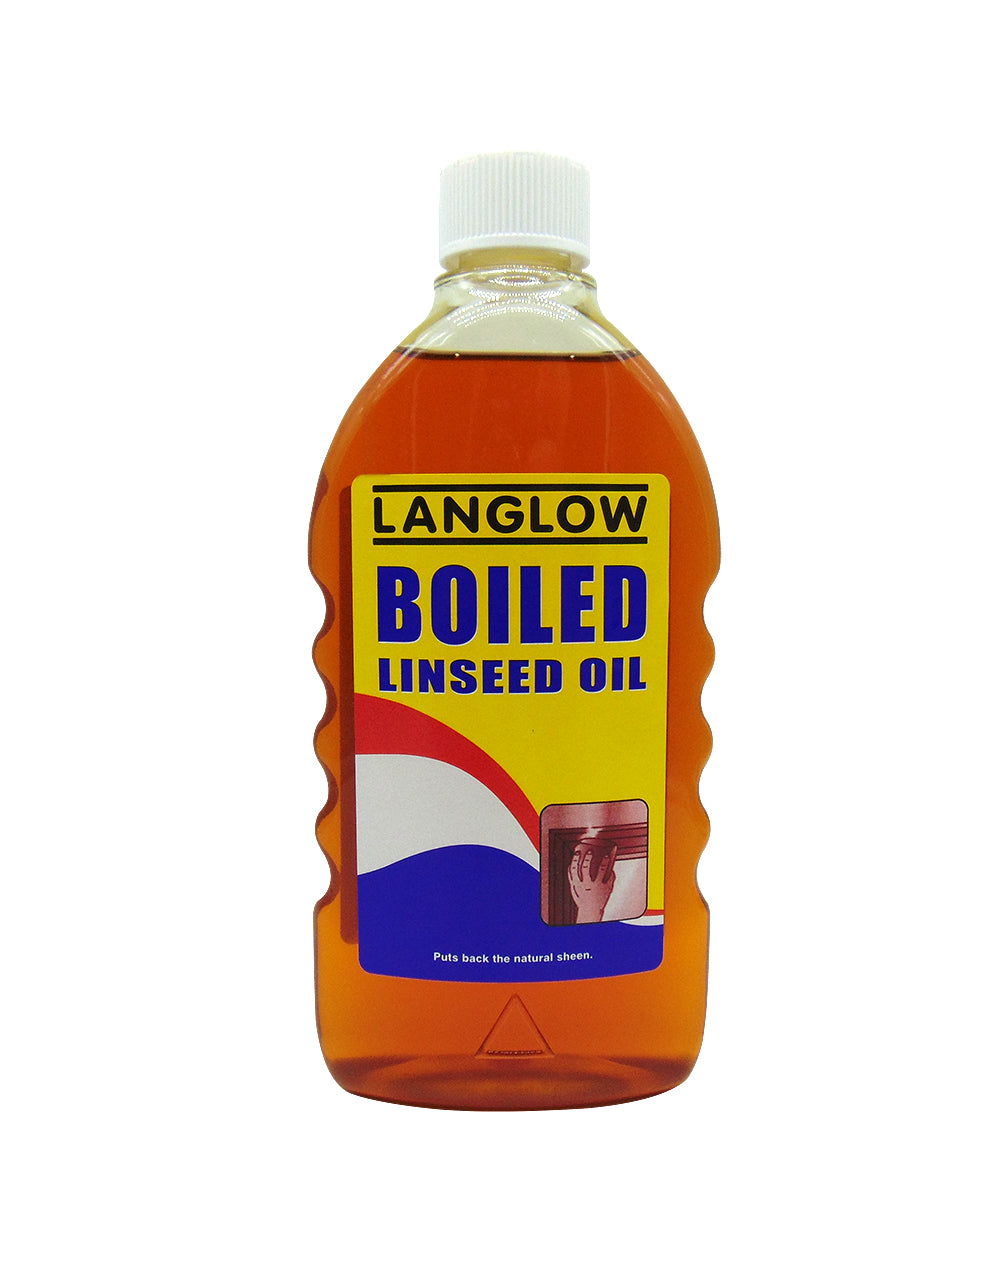 Palace LANGLOW Boiled Linseed Oil